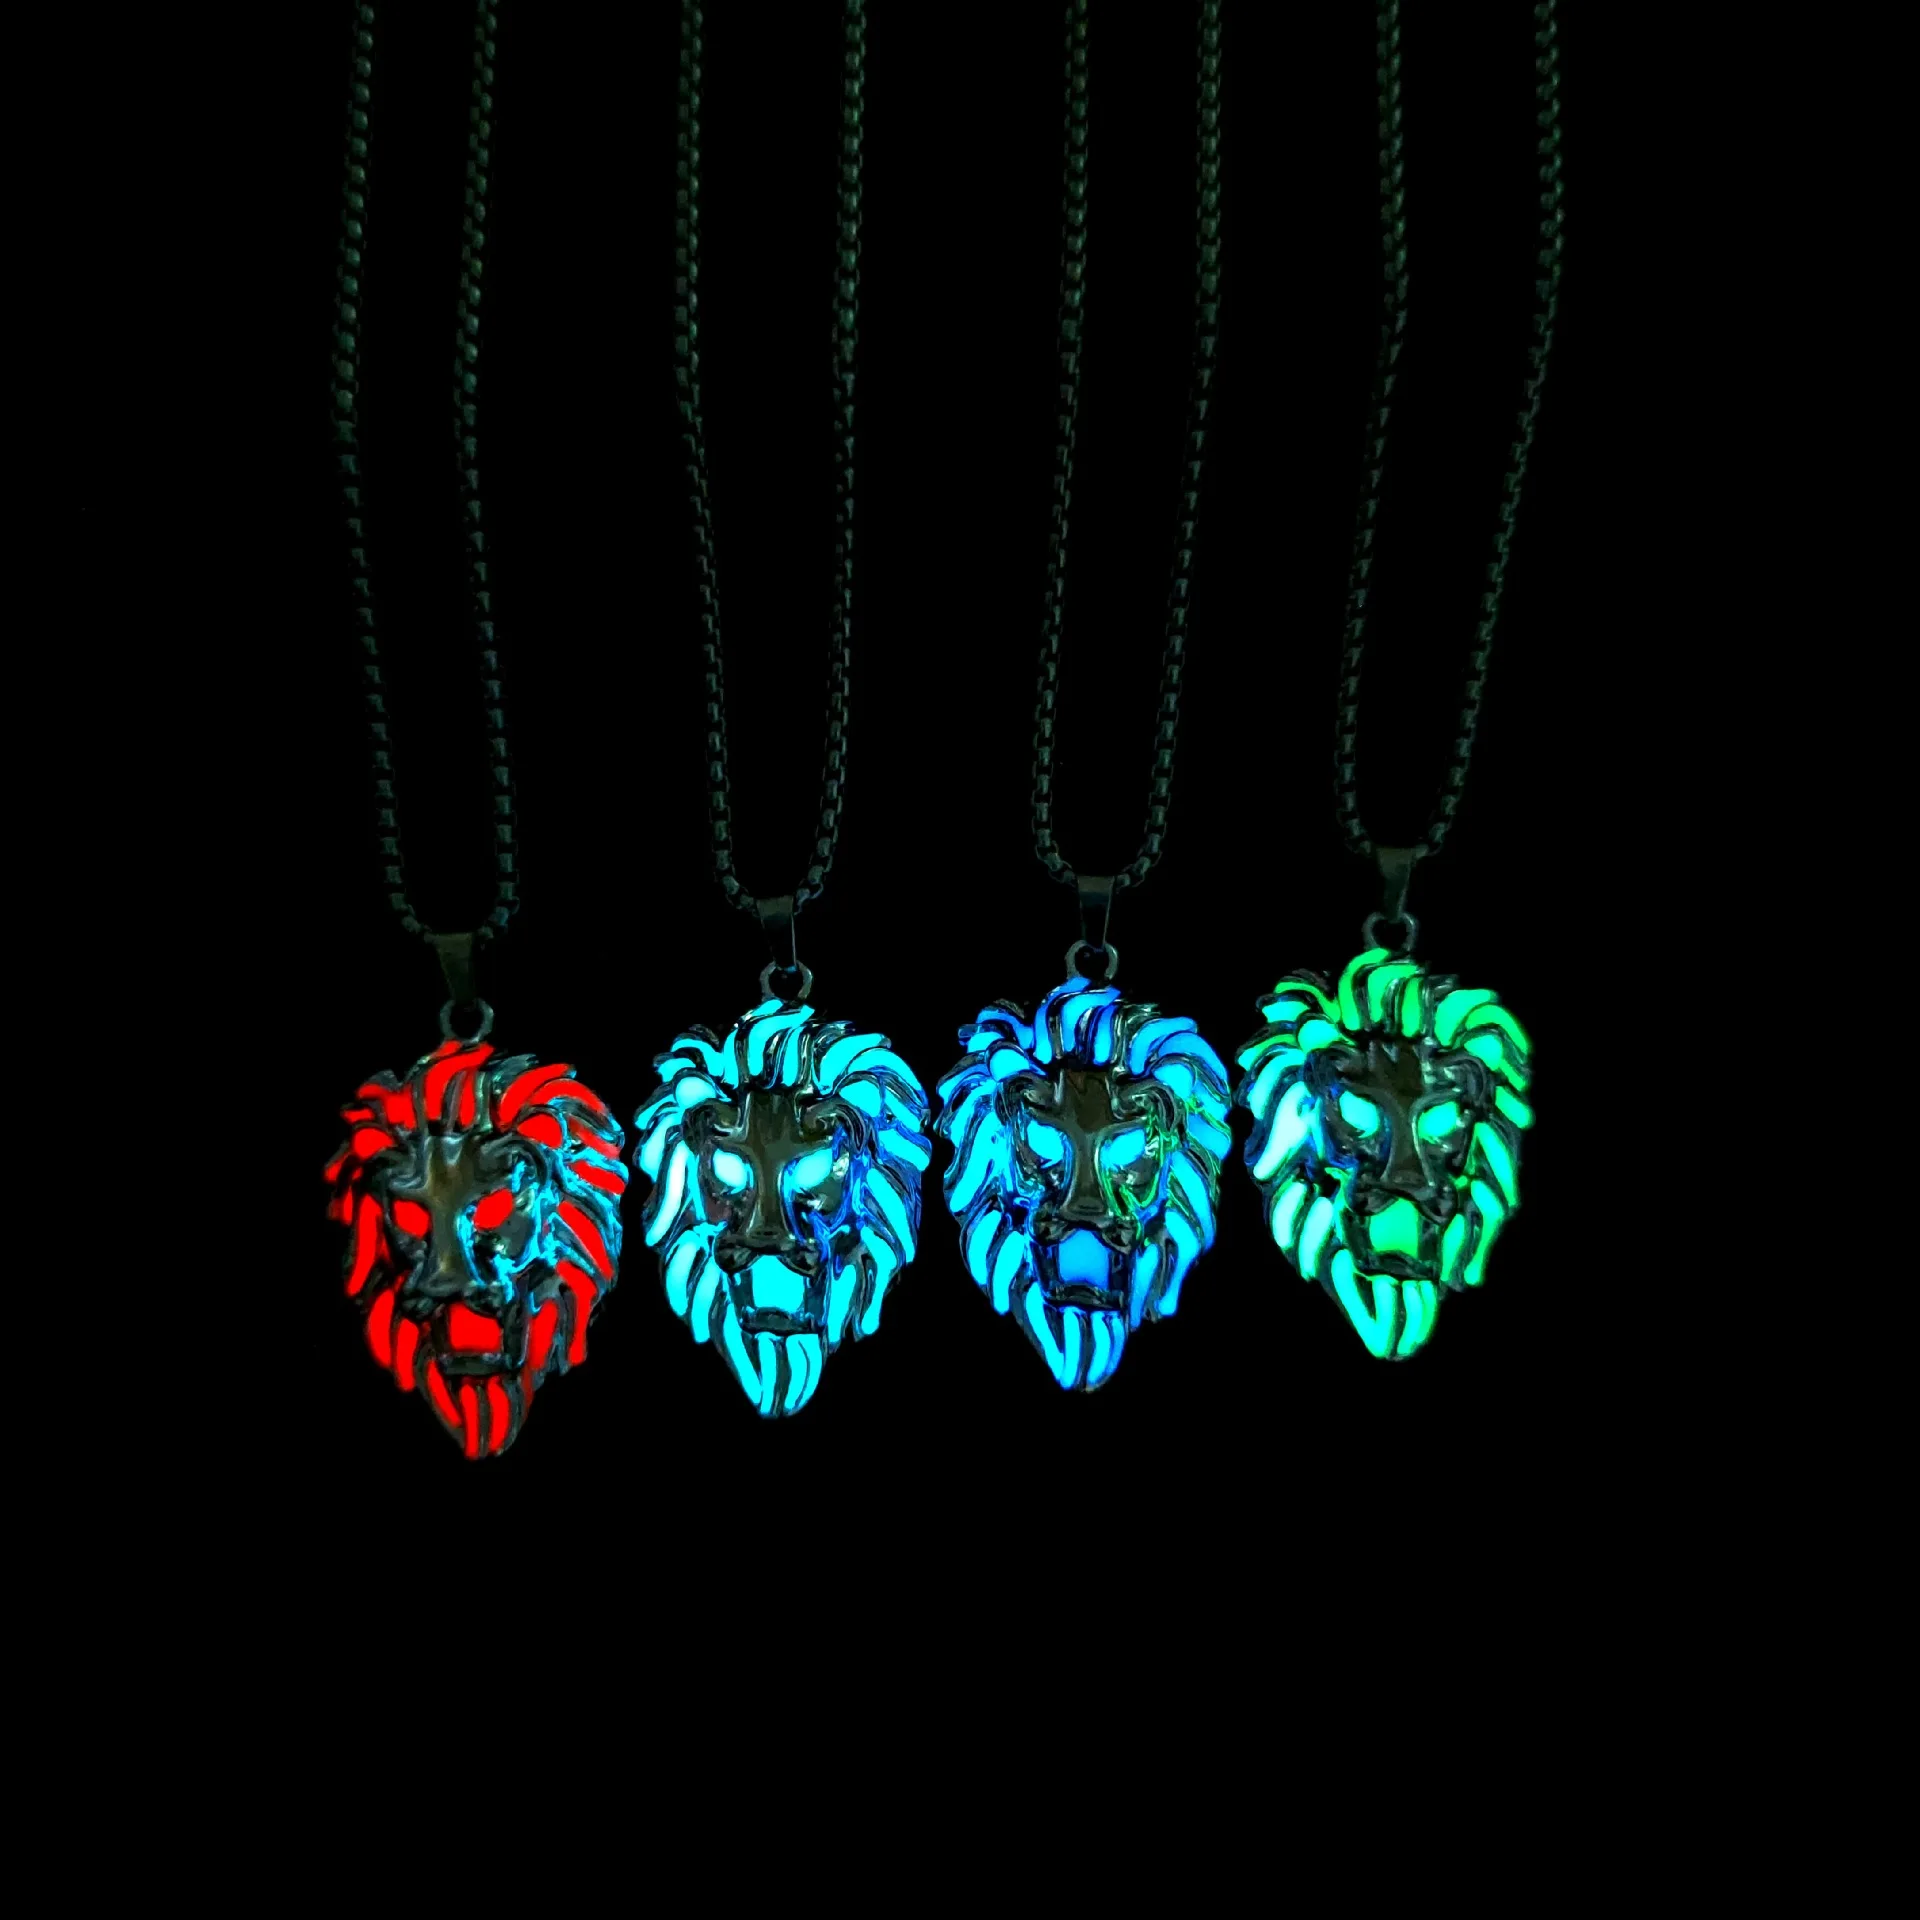 

Glowing Lion King Pendant Stainless Steel Chain Men's Statement Necklace Muti Color Luminous Charms Amulet Accessories Boys Gift